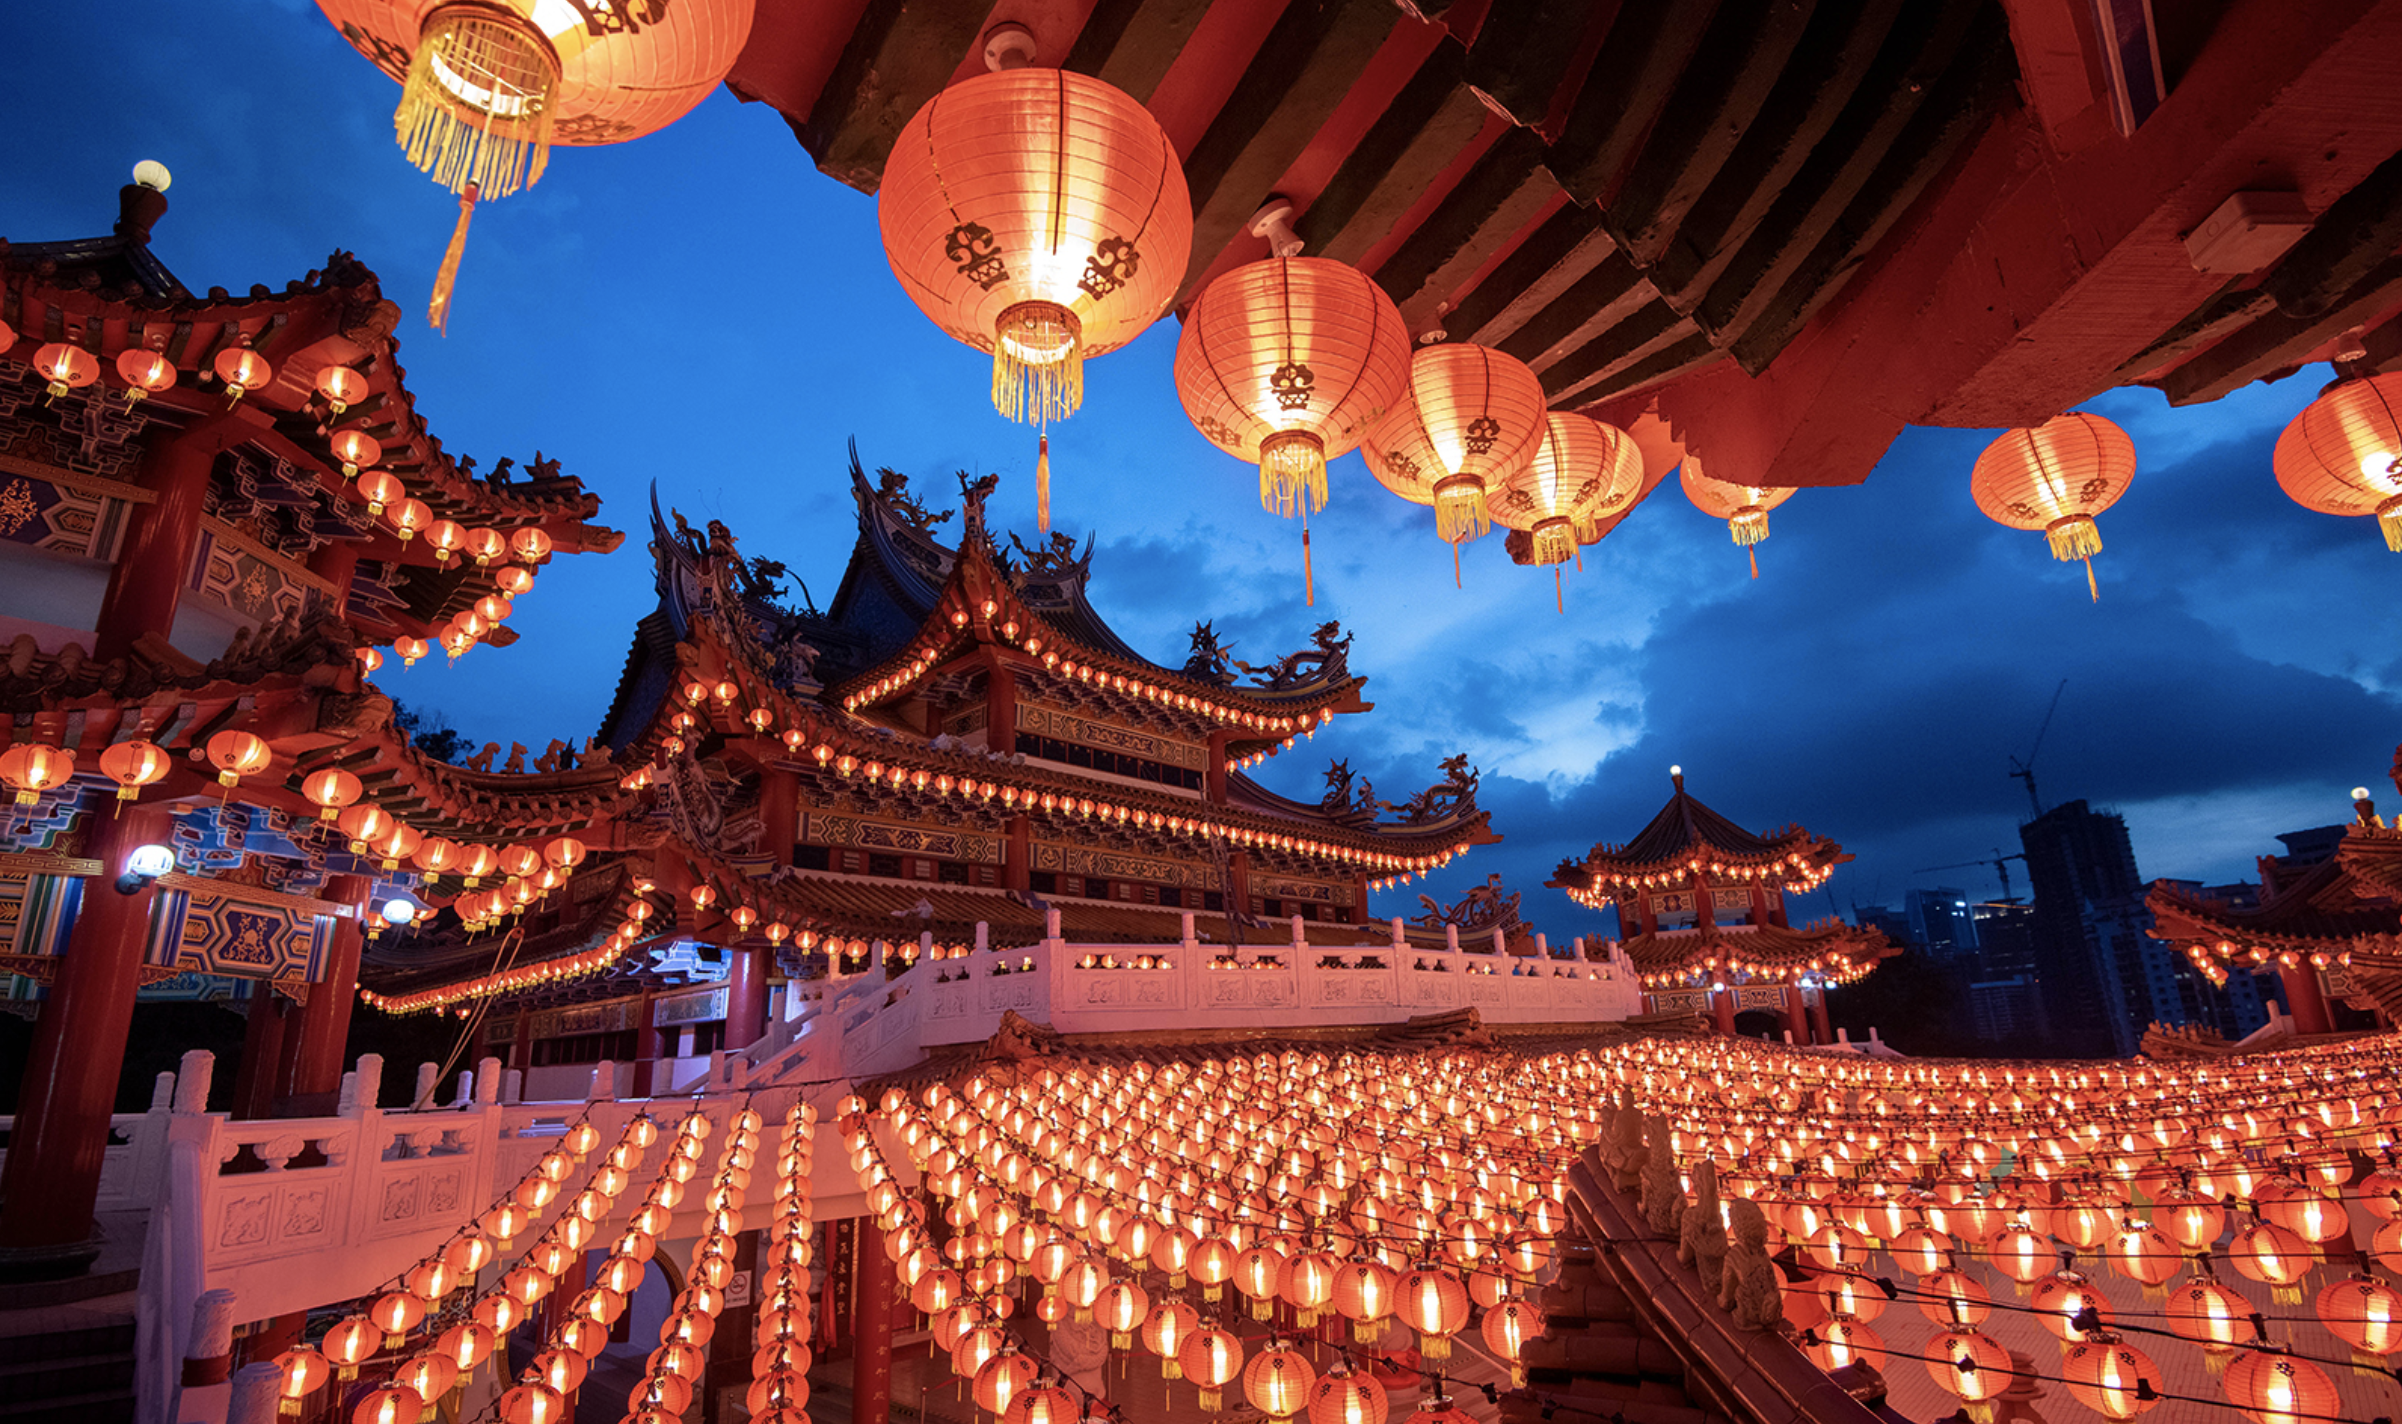 Malaysian temple stands against a blue night sky, with glowing red lanterns in rows on the floor and in the foreground